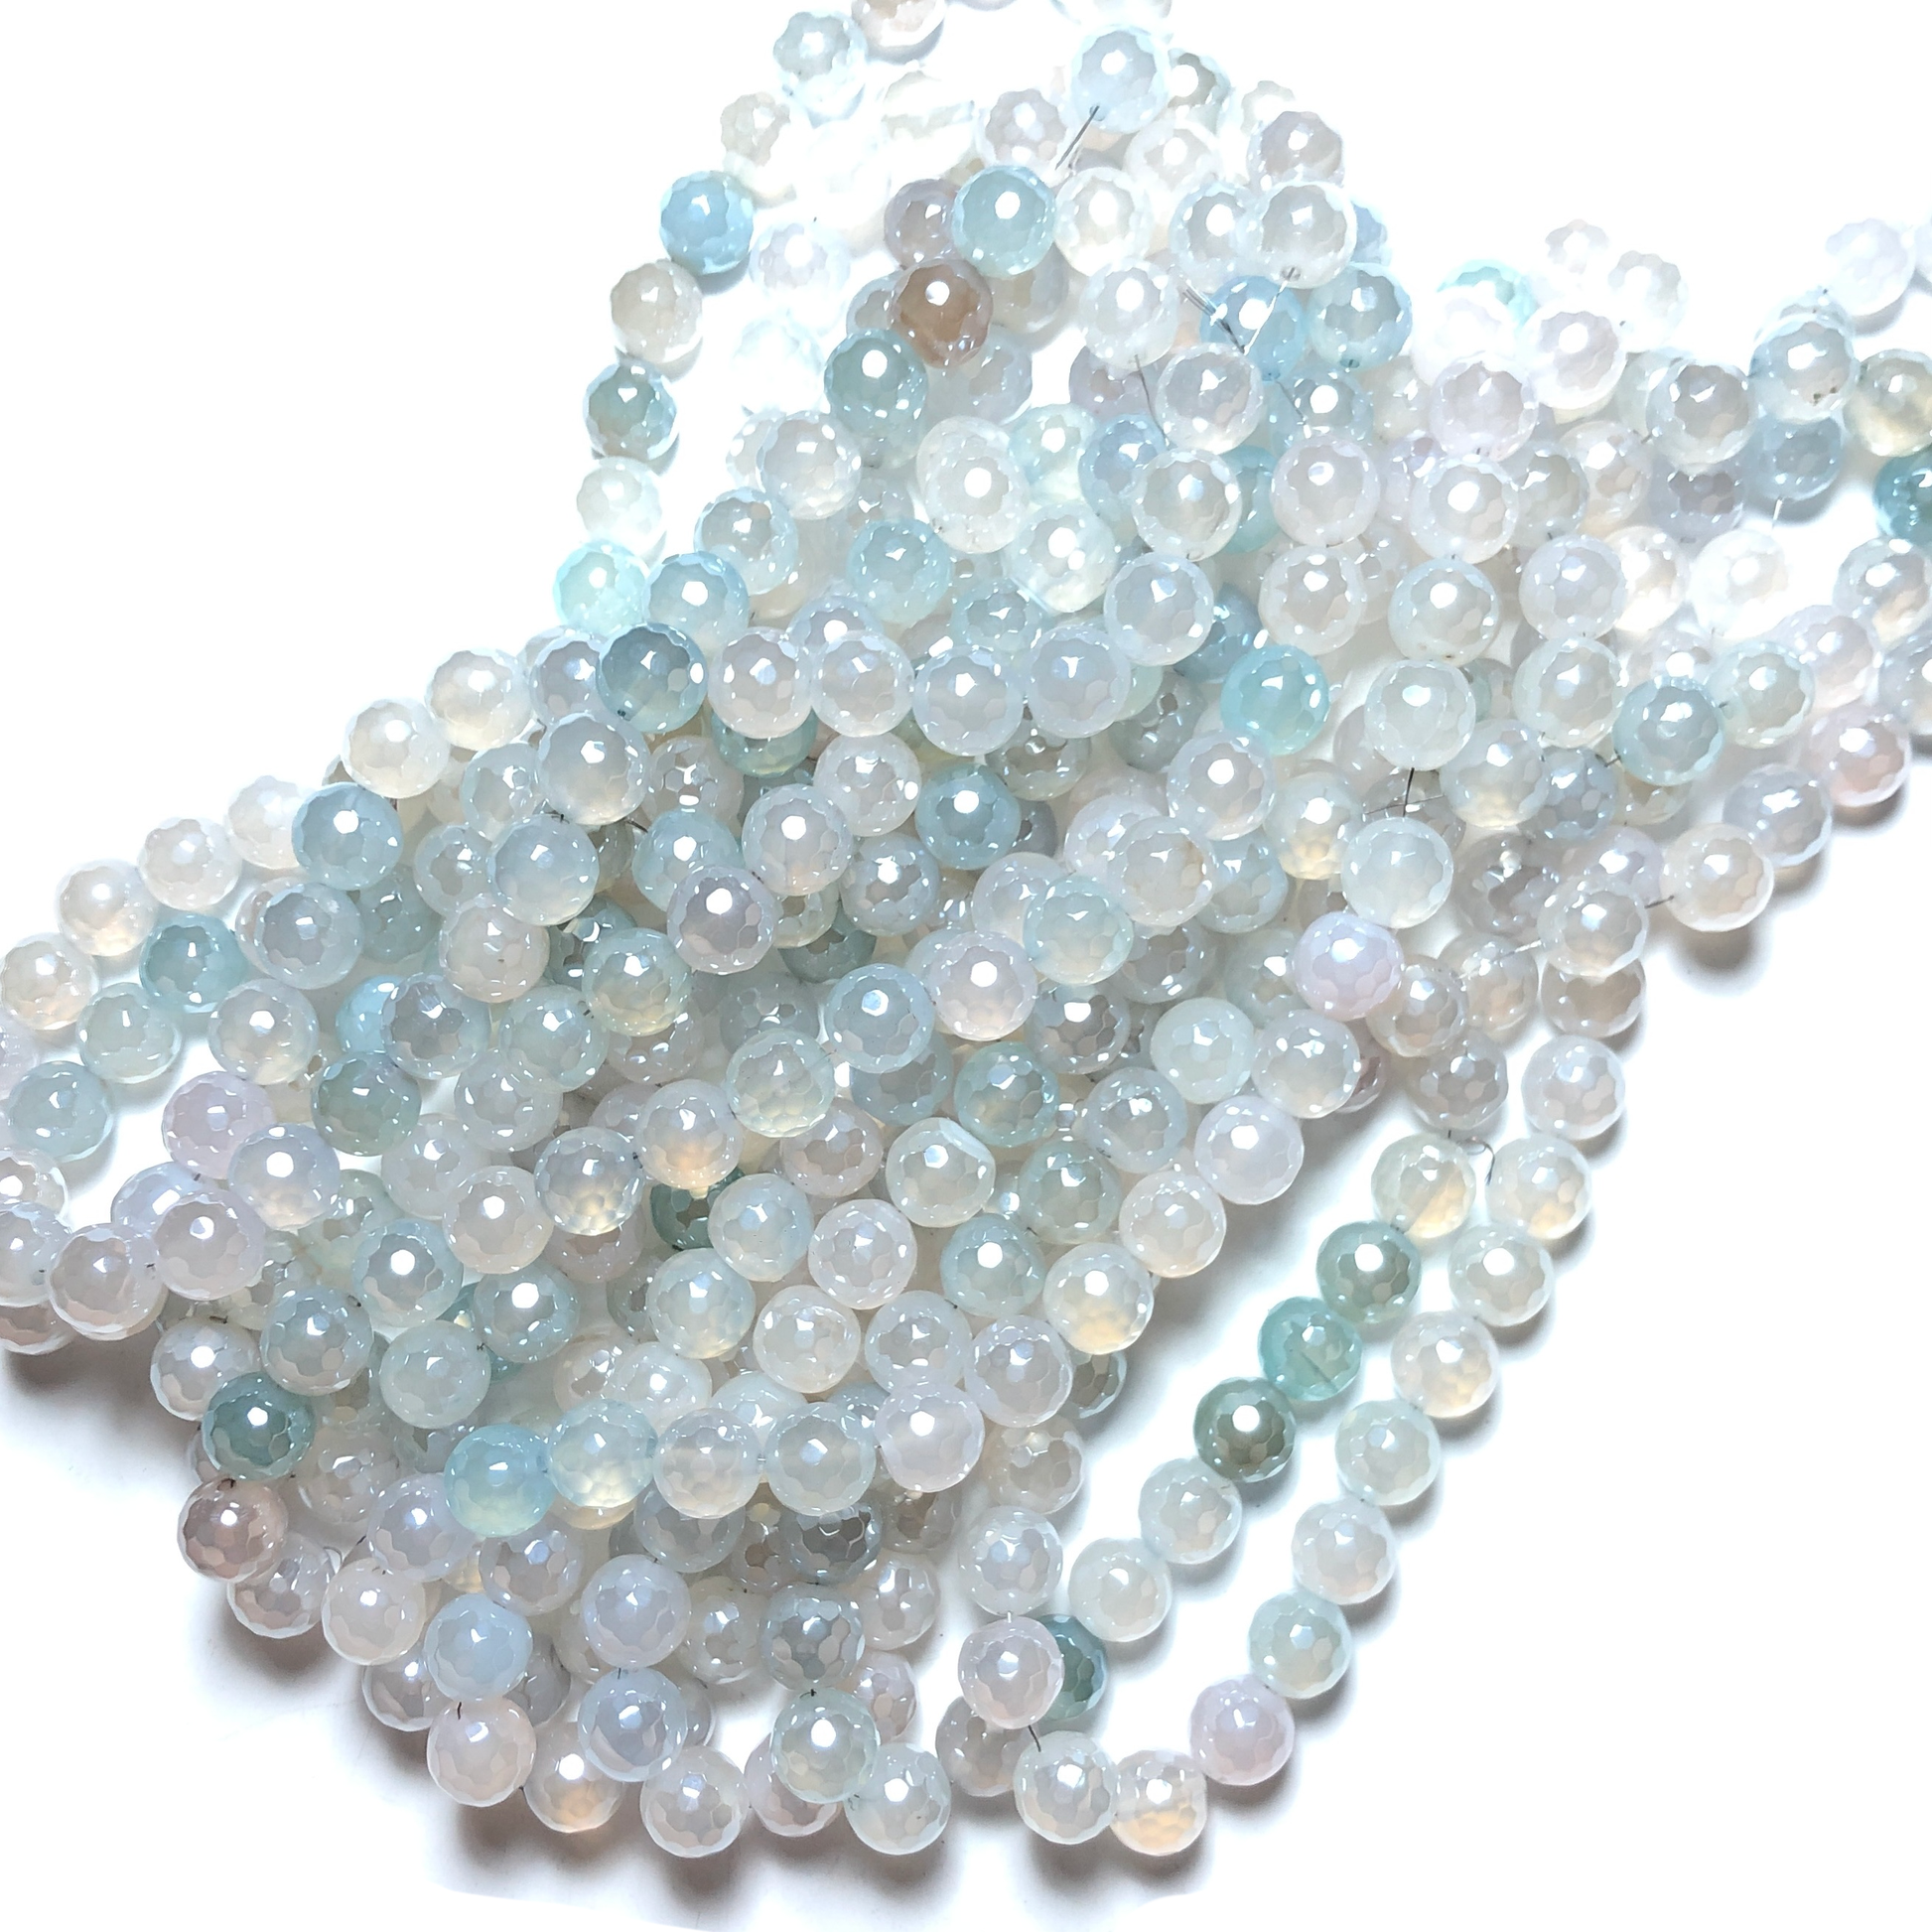 2 Strands/lot 10mm Electroplated Clear Light Blue Agate Faceted Stone Beads Electroplated Beads Electroplated Faceted Agate Beads New Beads Arrivals Charms Beads Beyond